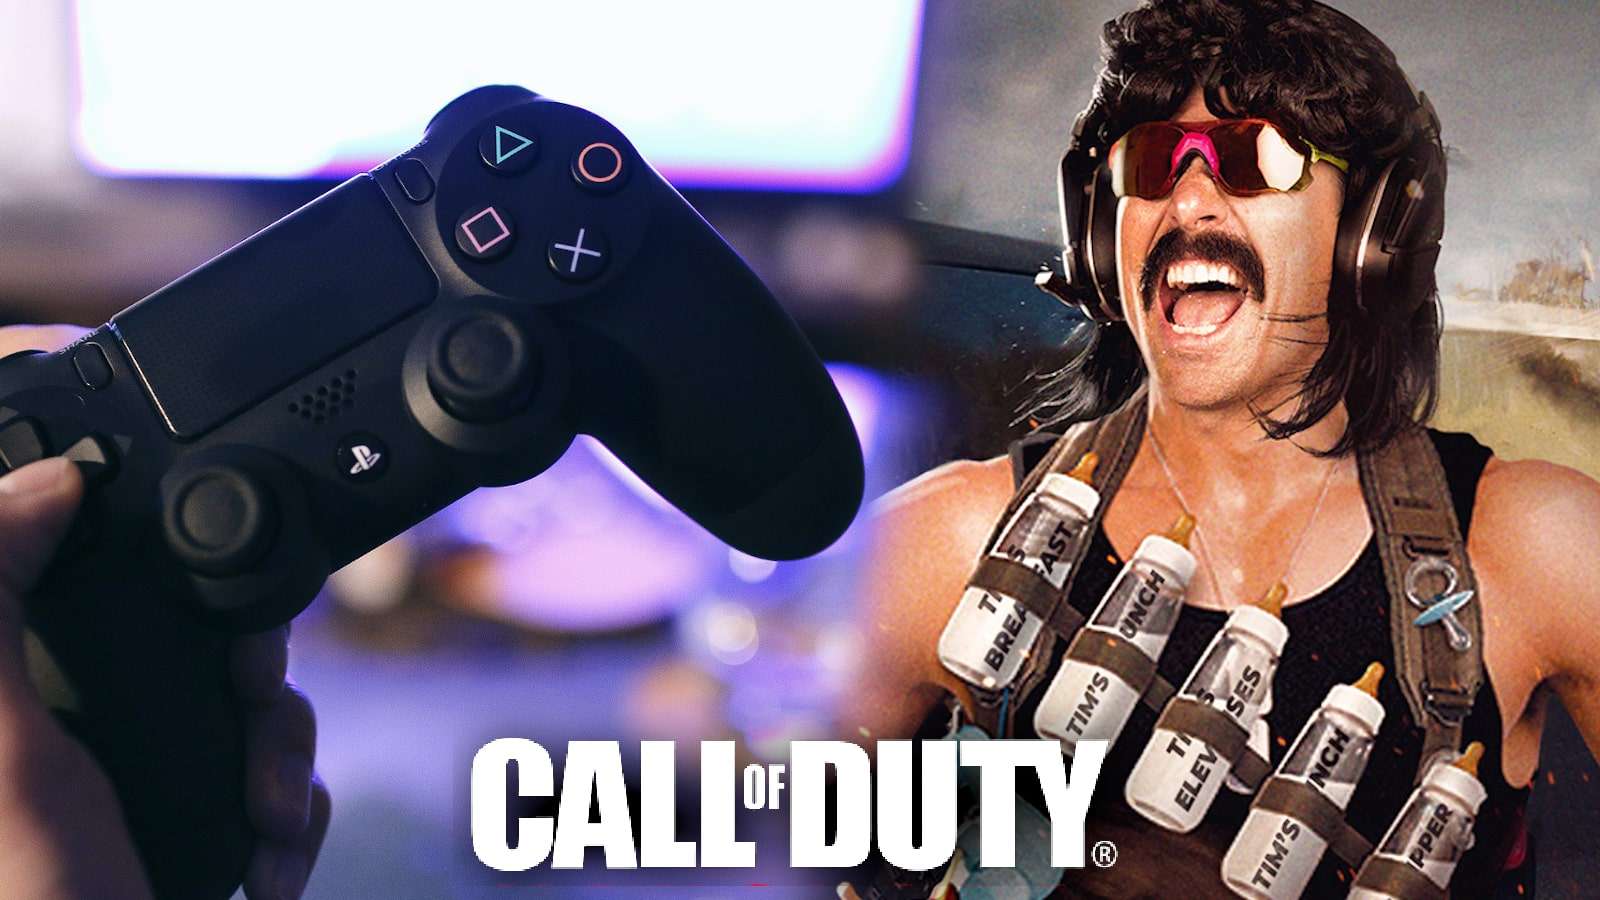 dr disrespect insult controller aim assist call of duty legends respond warzone